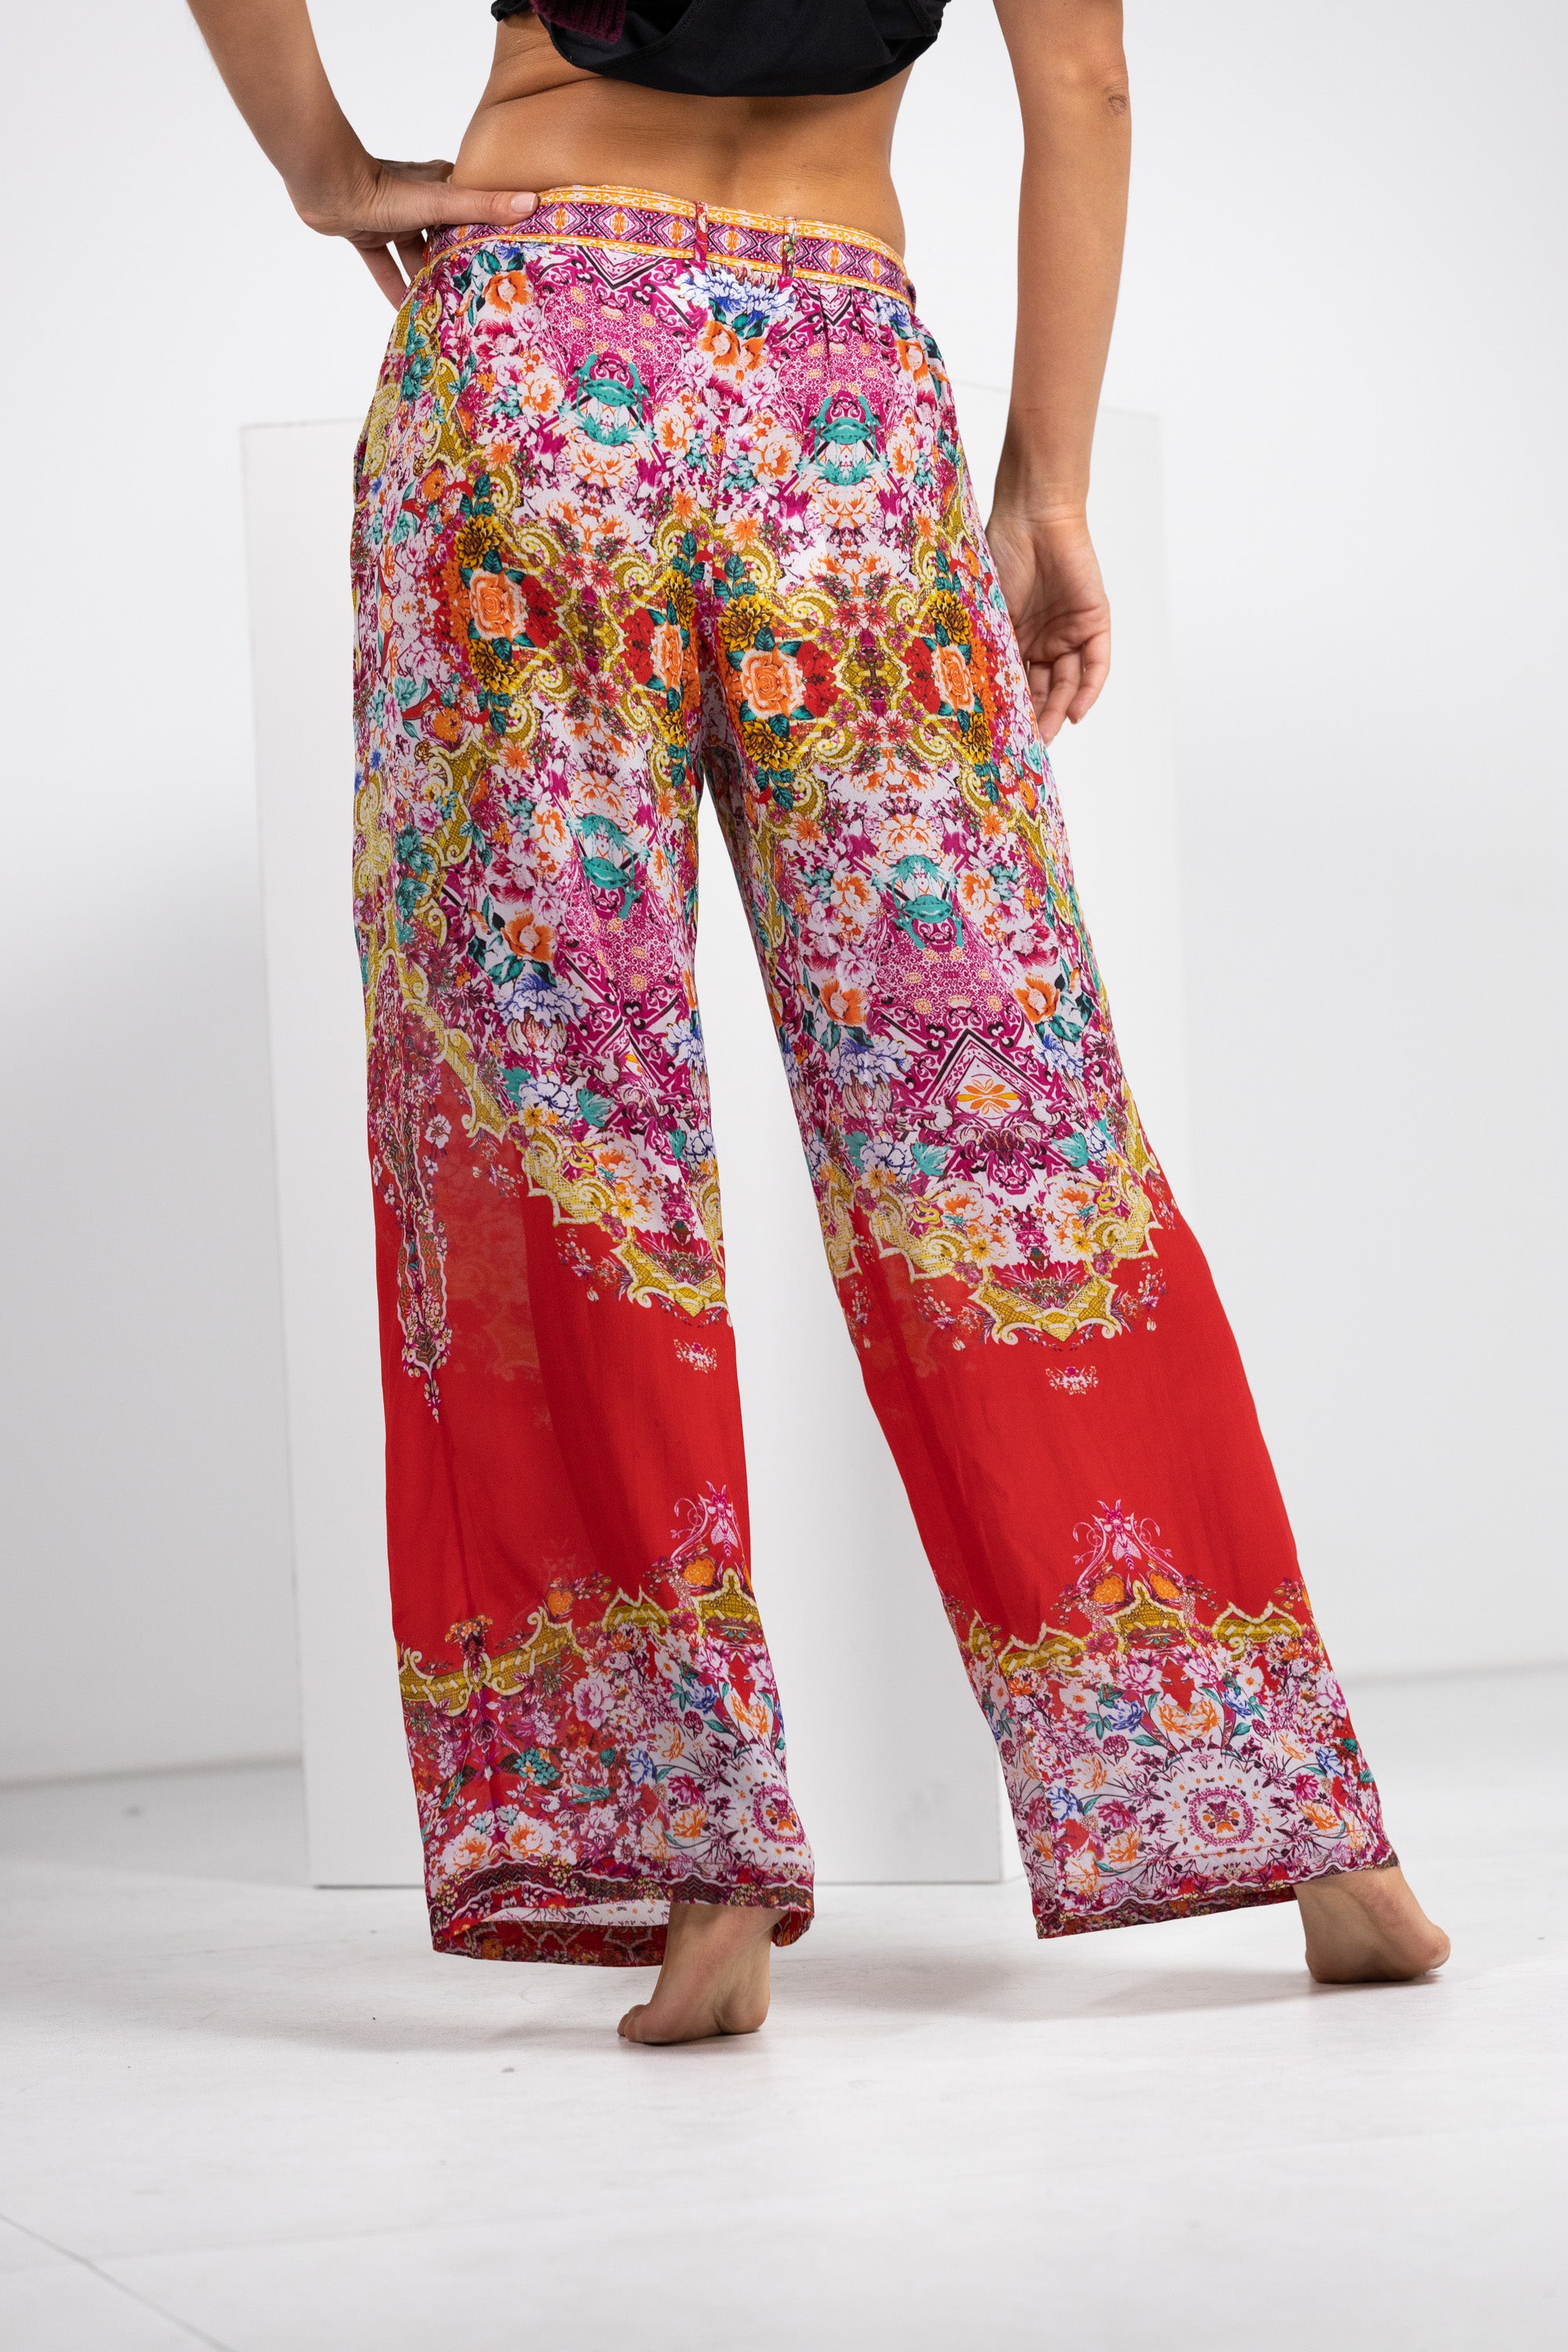 INOA Clothing - Slouch Trouser in Versailles Gardenia Red - Womens ...